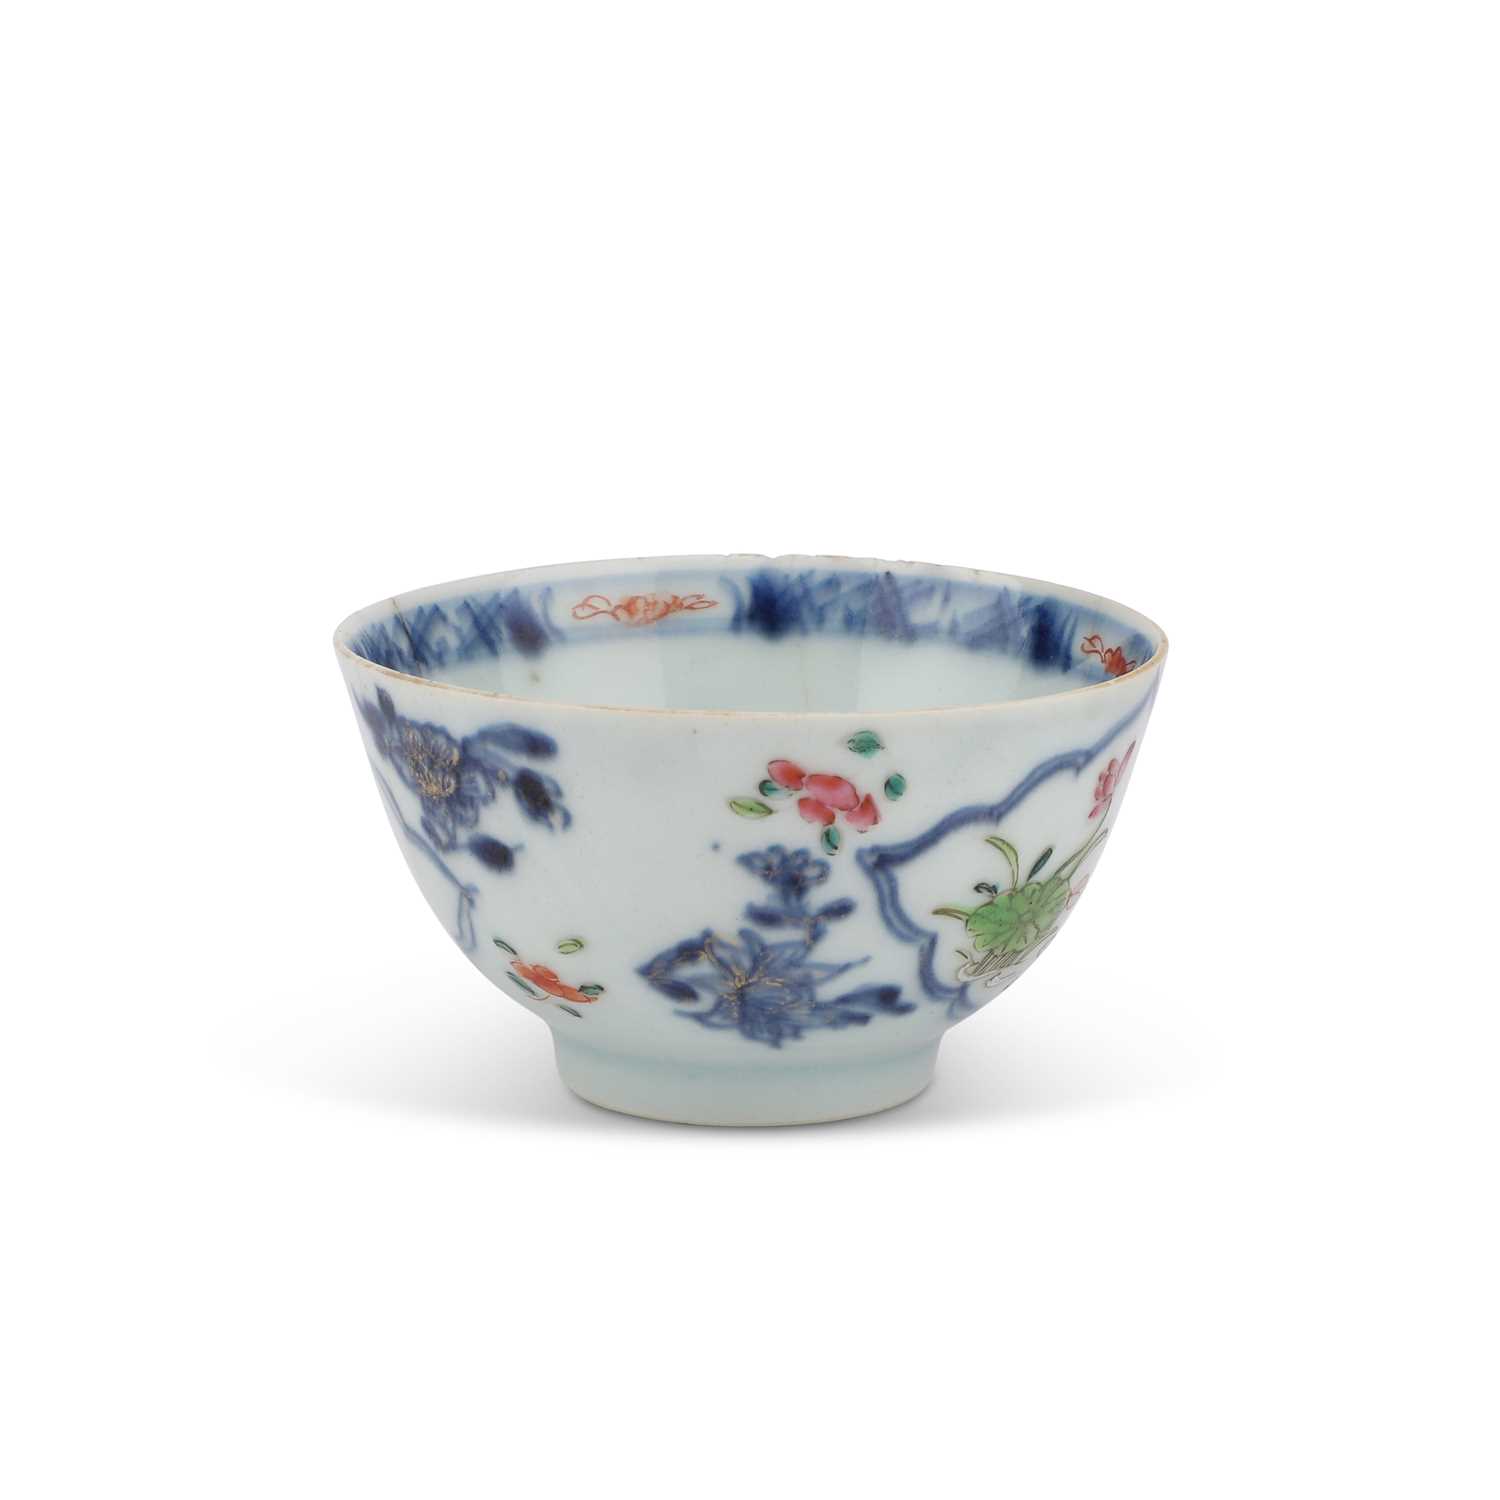 AN 18TH CENTURY CHINESE FAMILLE ROSE TEA BOWL